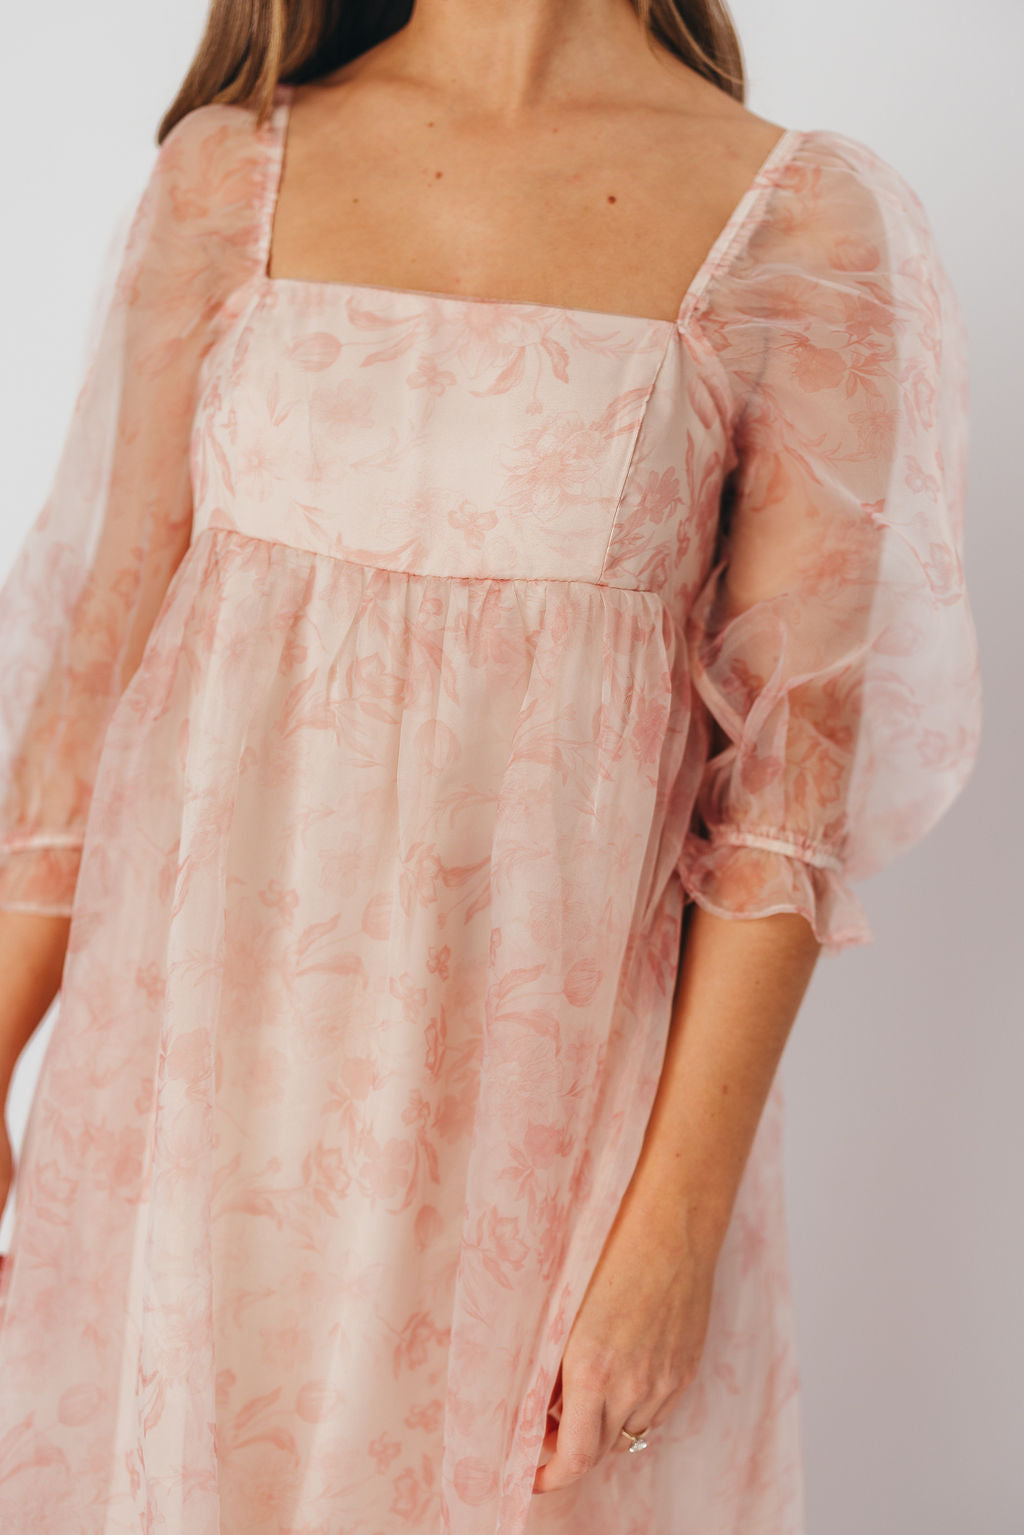 *New* Mona Maxi Dress with Smocking in Pink Floral - Bump Friendly & Inclusive Sizing (S-3XL)